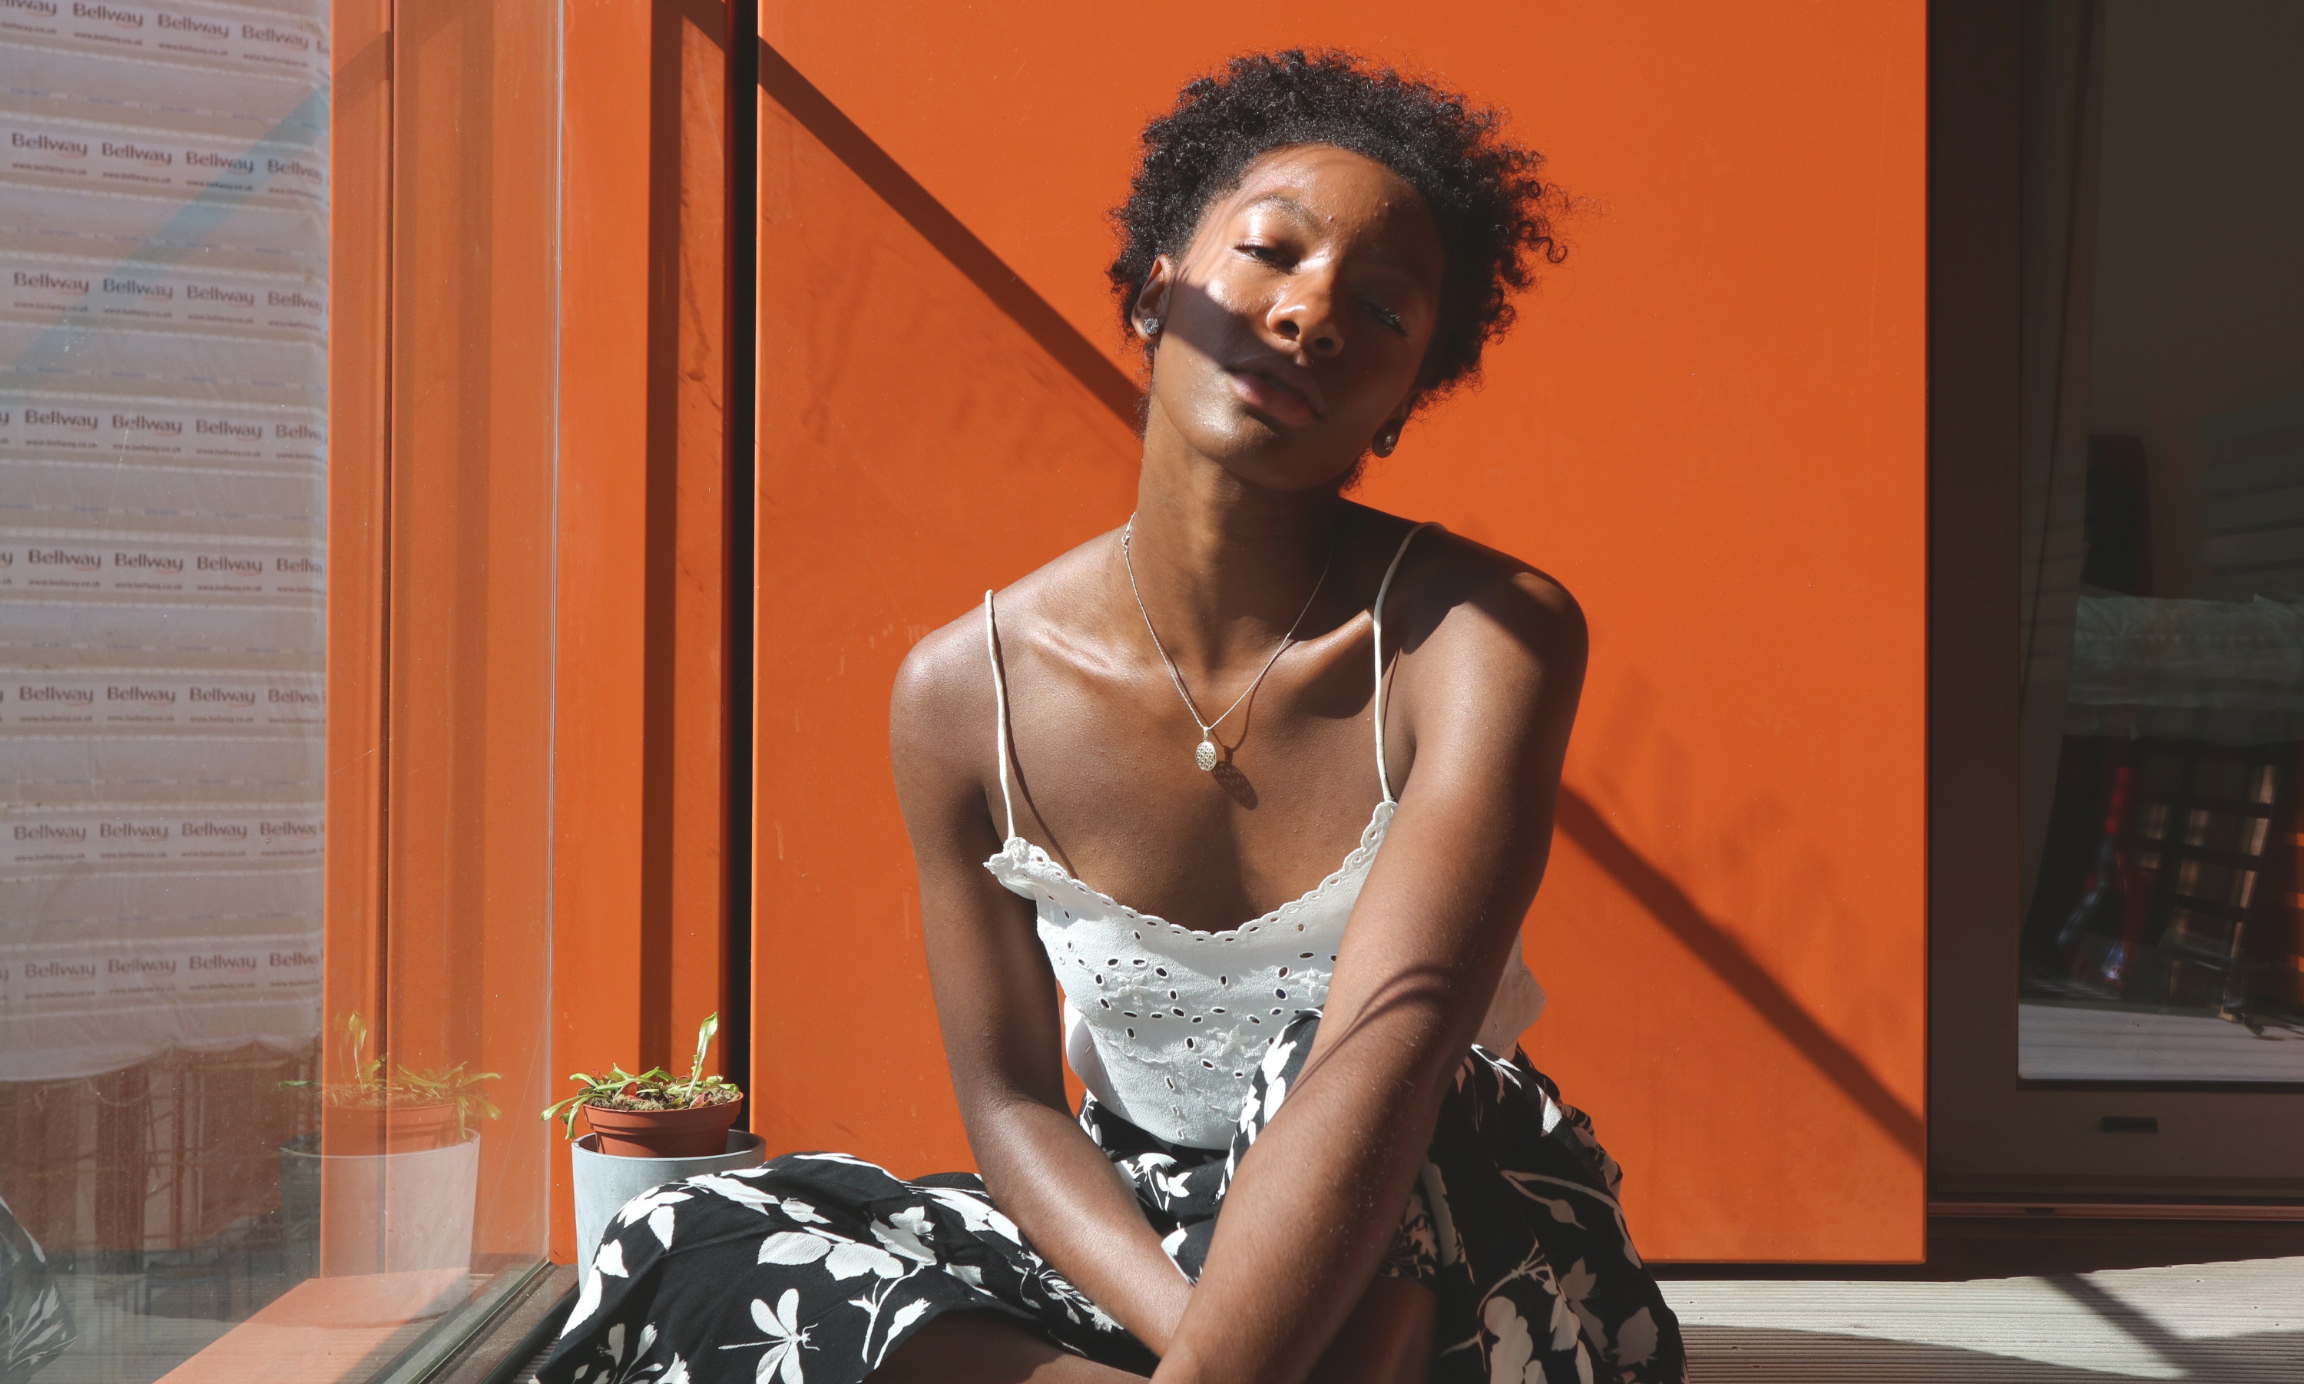 Precious is sitting facing the camera wearing a white lacy top and black and white skirt. There is a shadow across her face and an orange wall behind her. Precious is a Black woman with short curly hair.